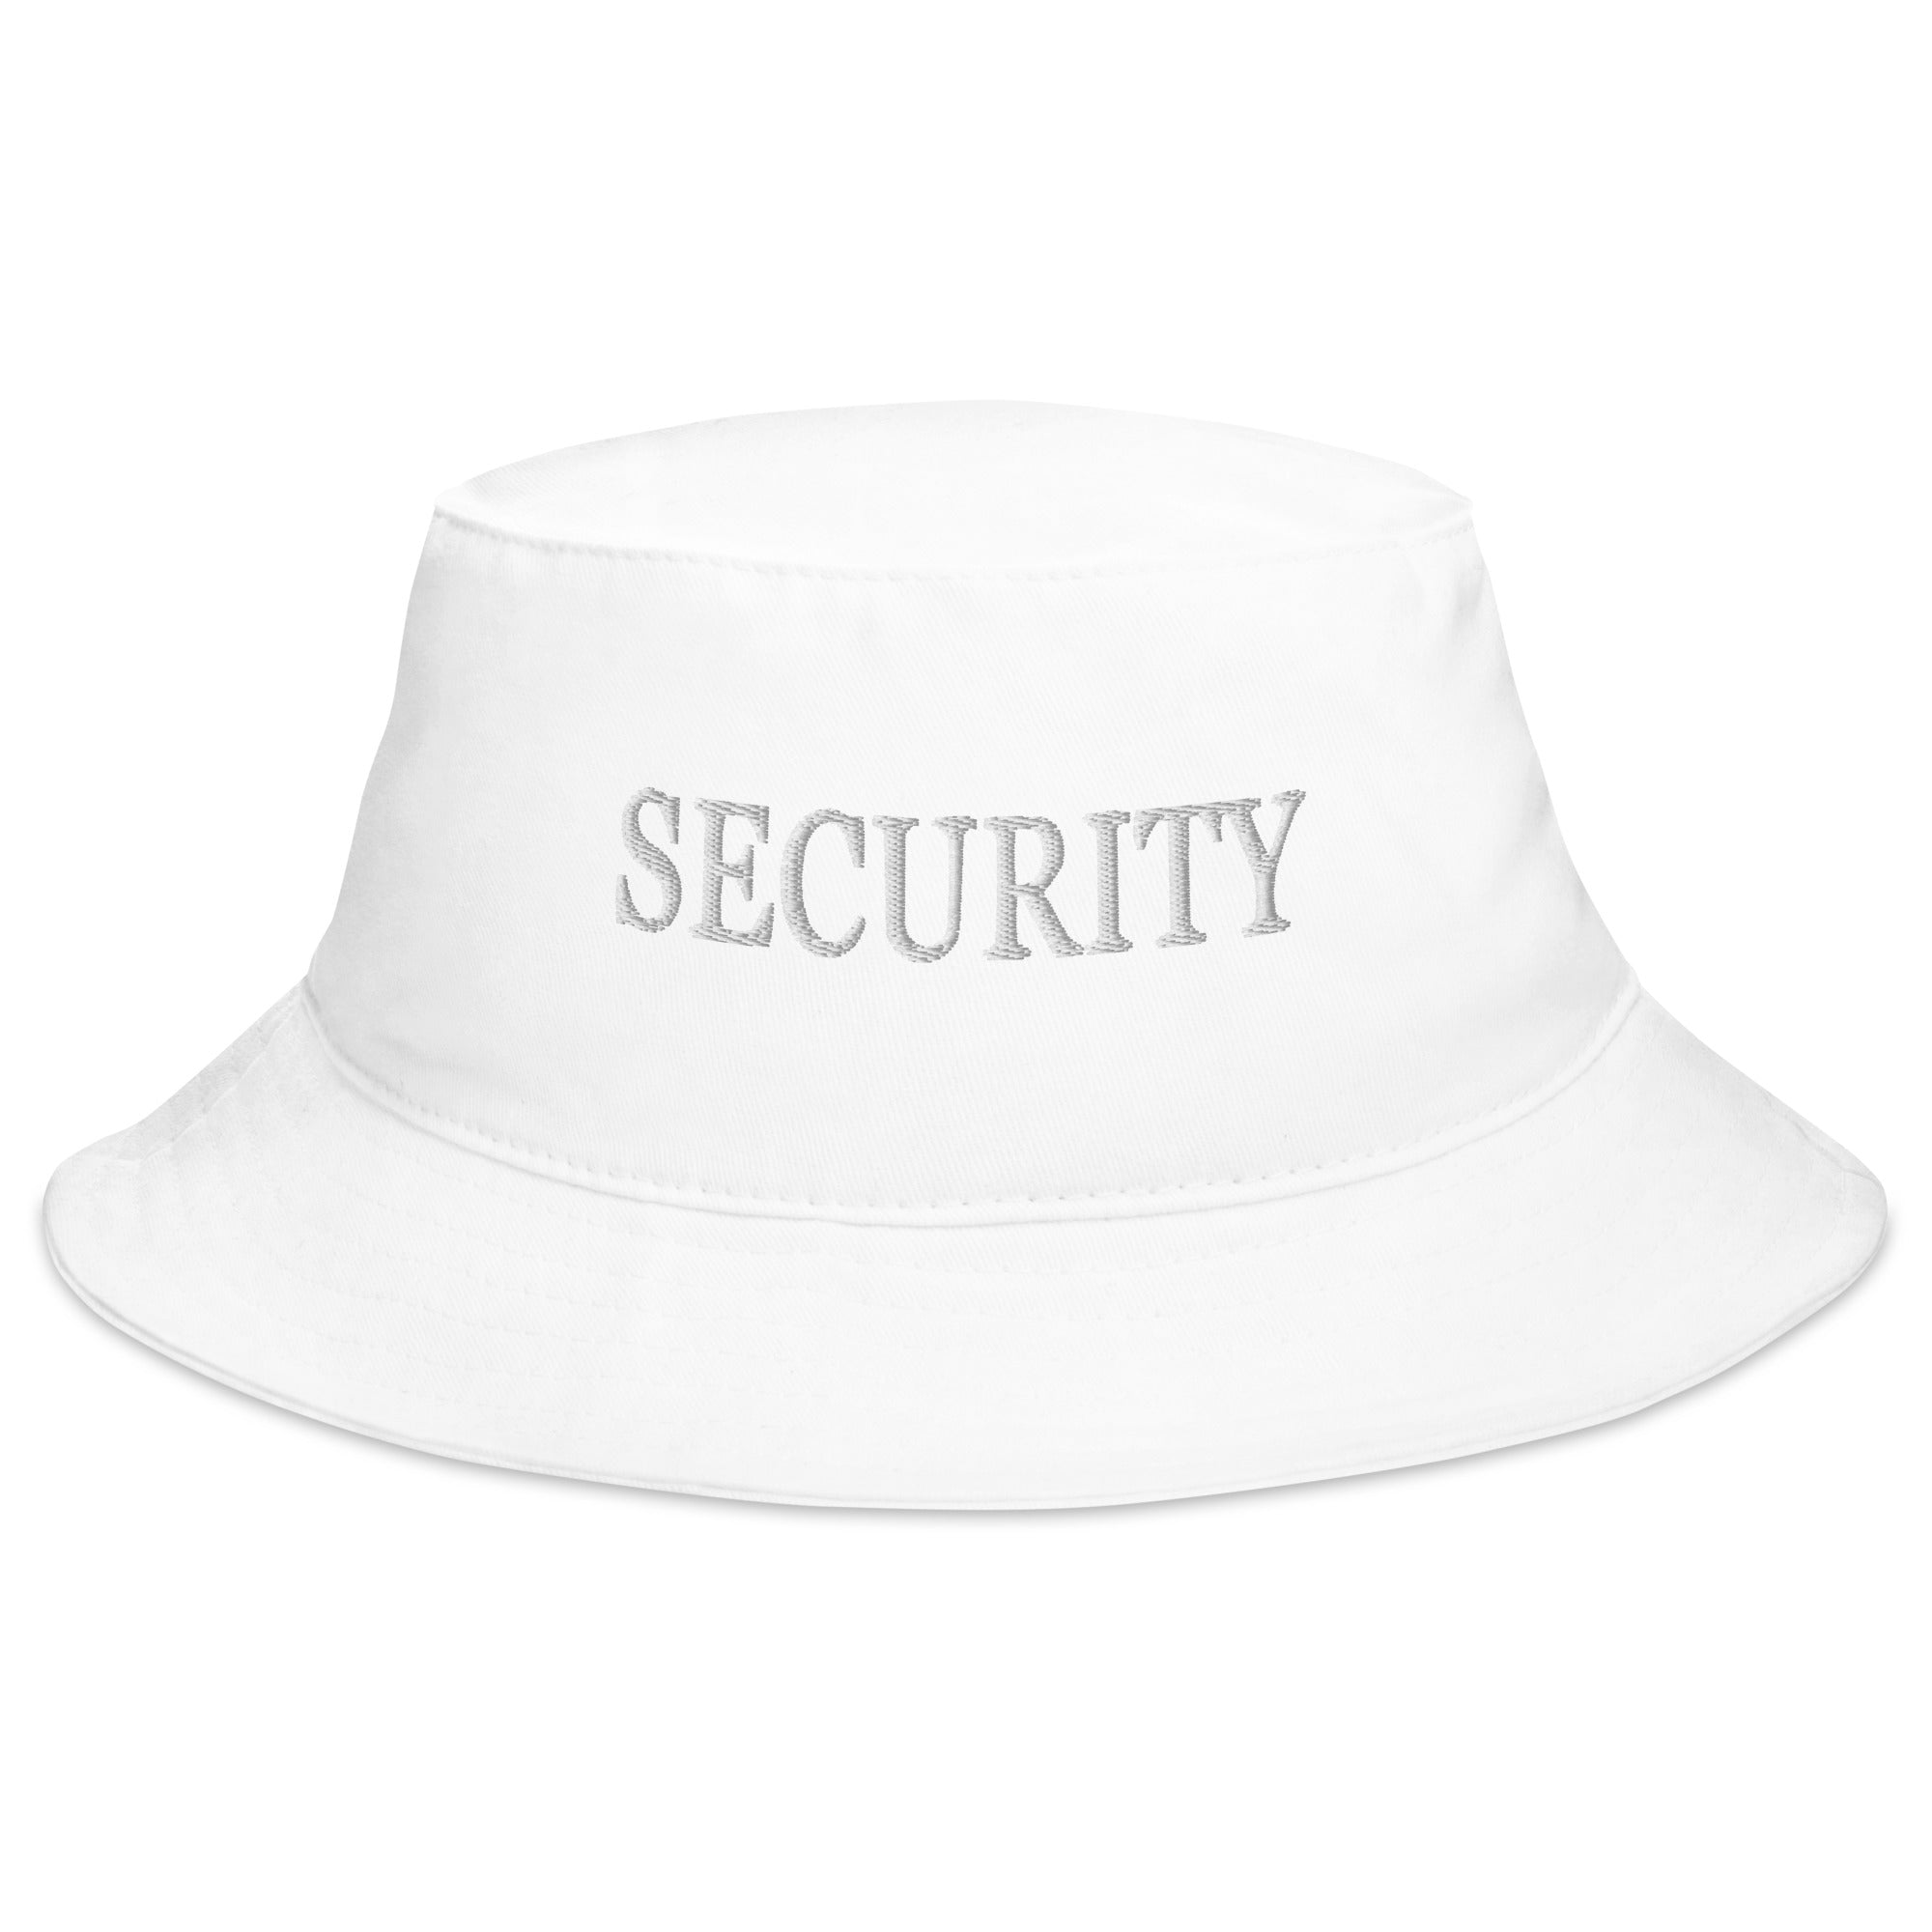 Security Embroidered Bucket Hat FNAF Cosplay